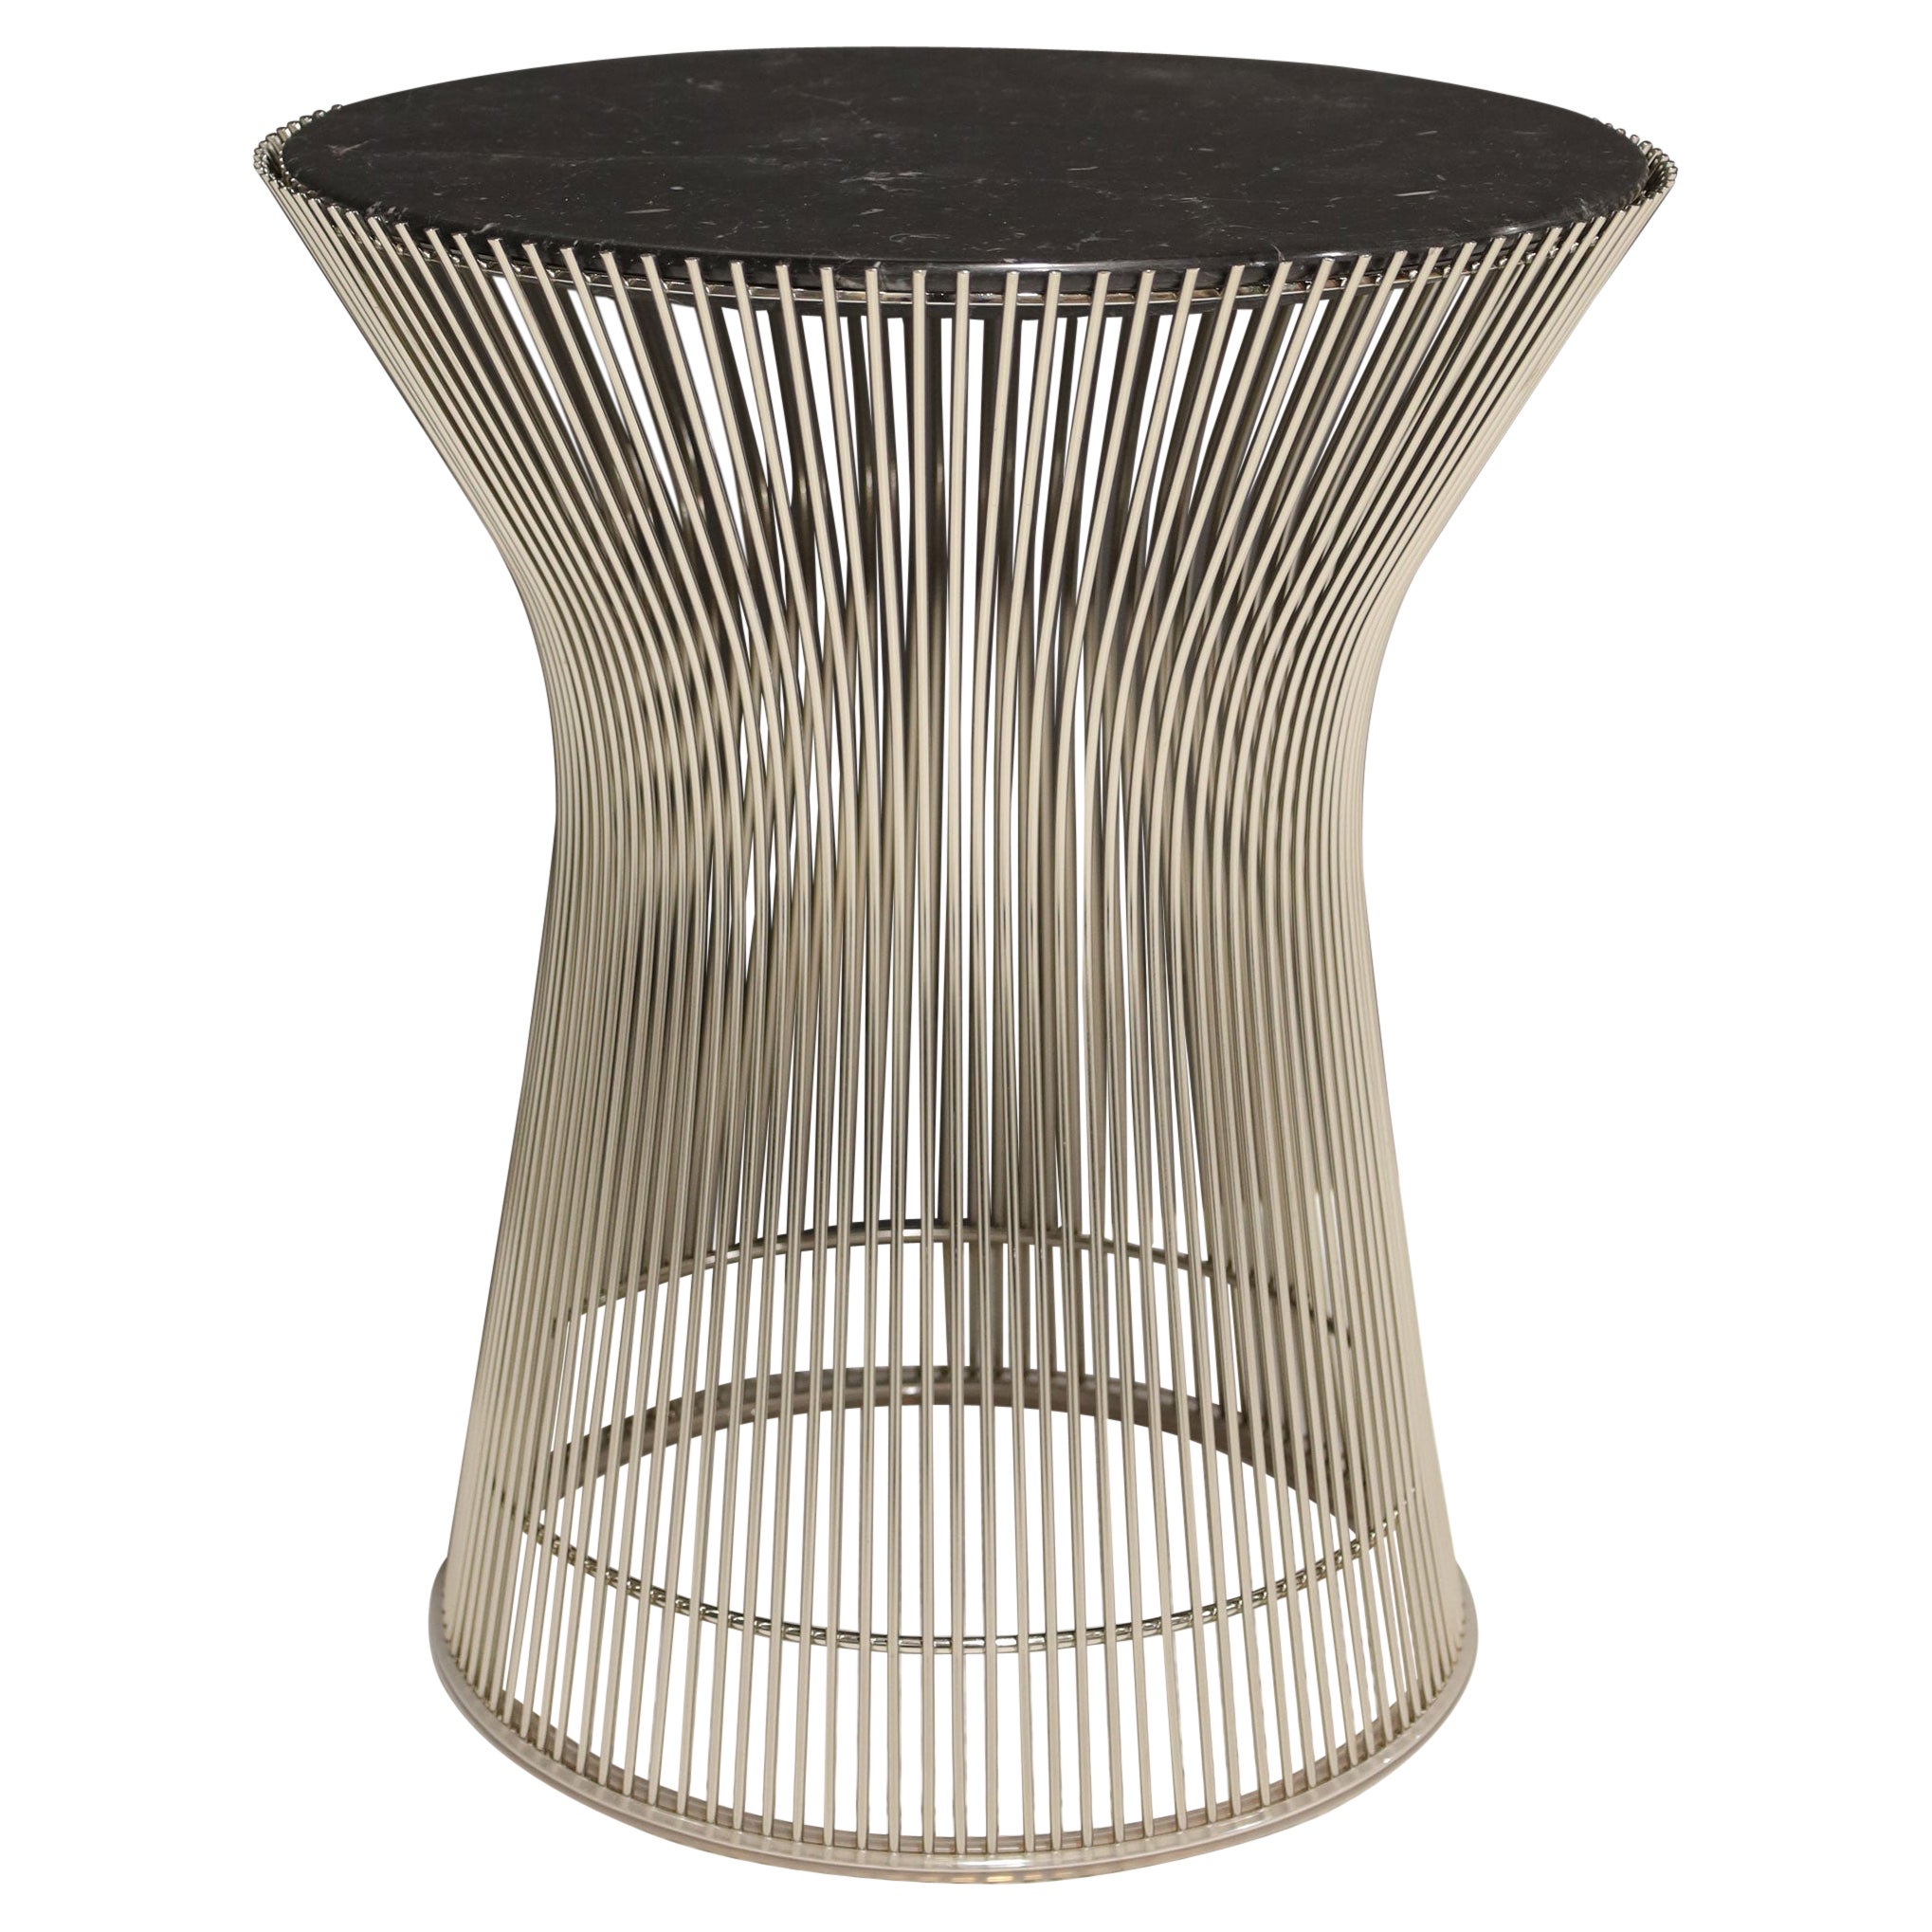 Warren Platner for Knoll Side Table with Marble Top